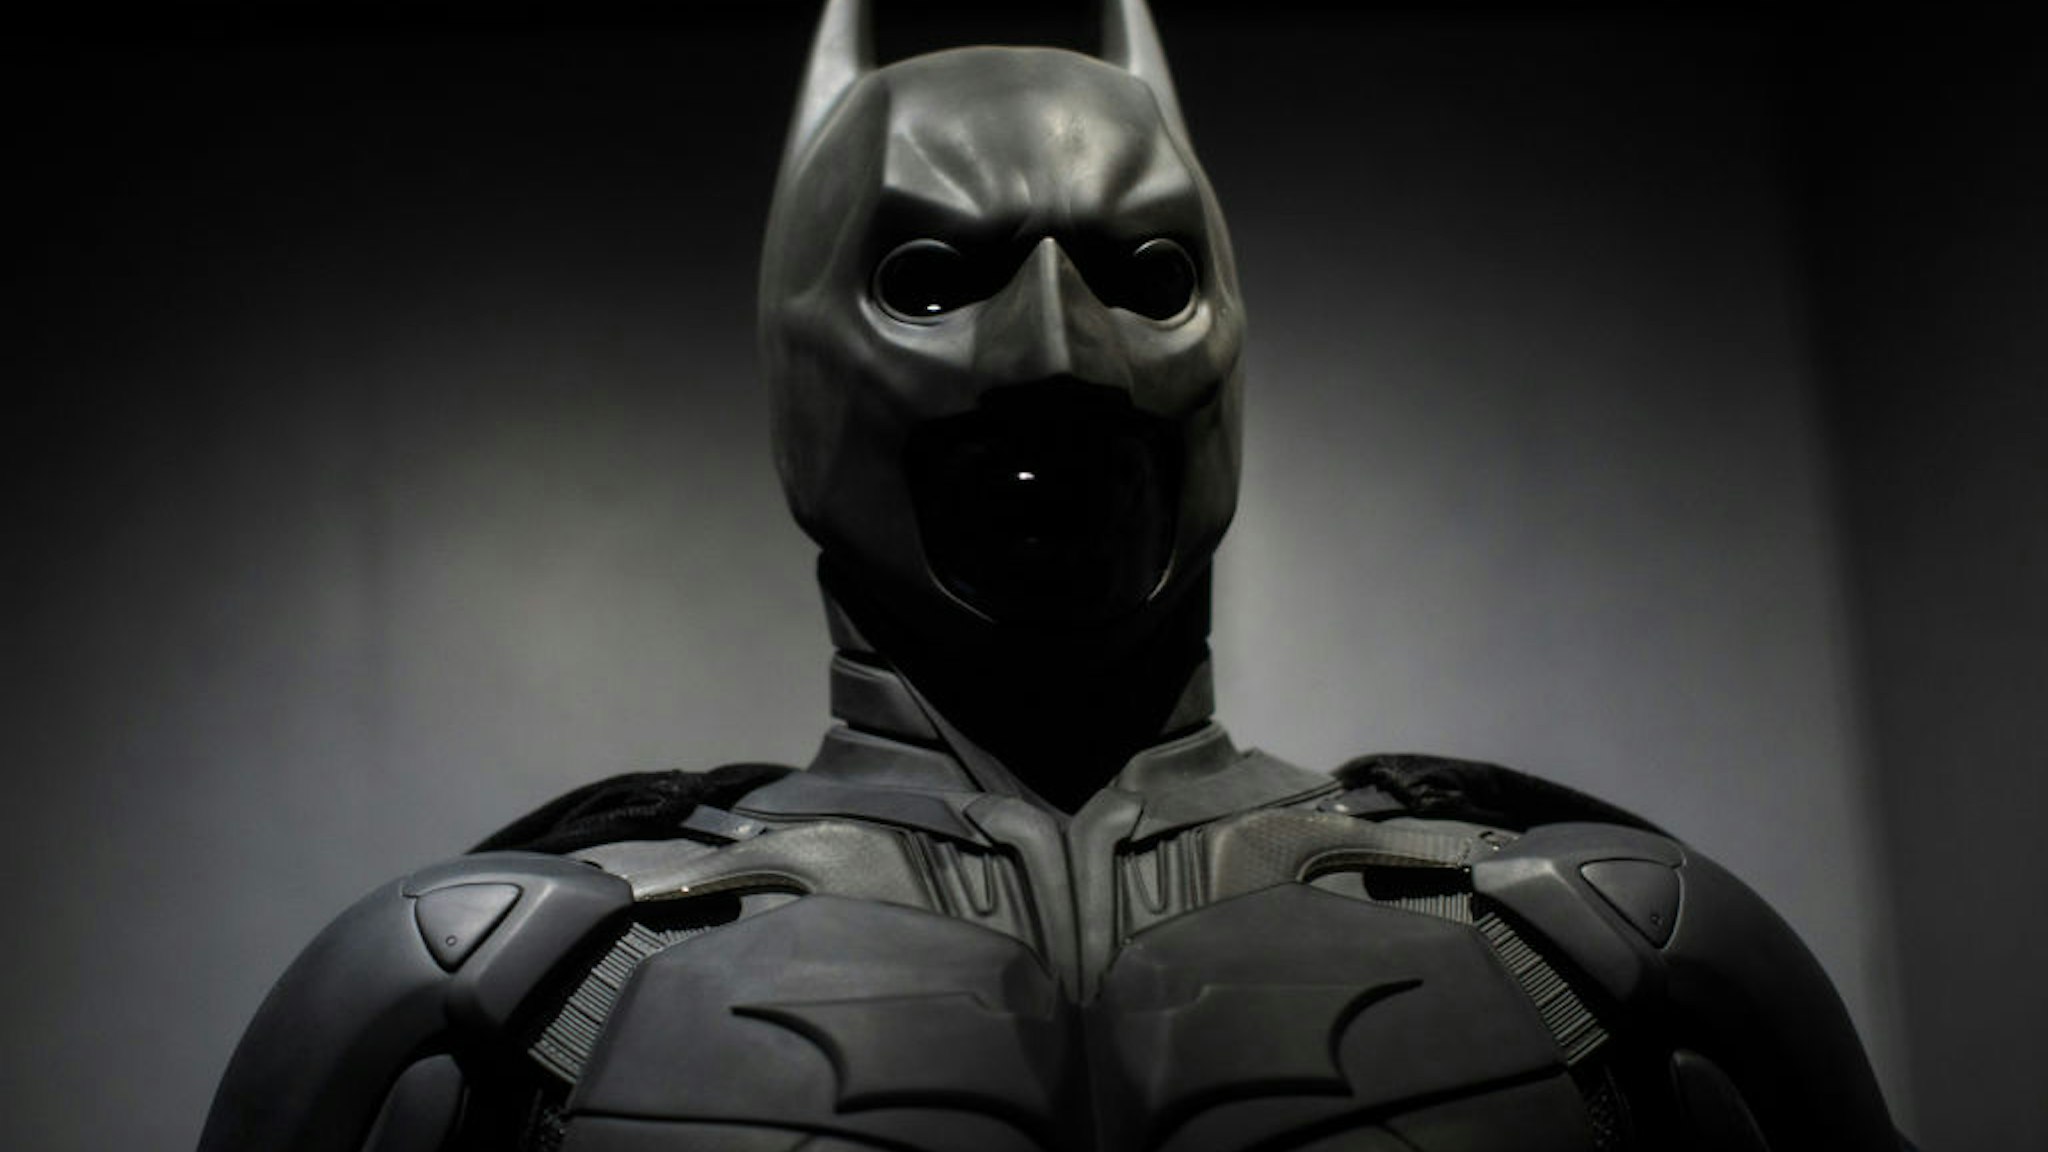 A Batman costume from the 2012 Dark Knight Rises film worn by Christian Bale and designed by Lindy Hemming is on display at the DC Comics Exhibition: Dawn Of Super Heroes at the O2 Arena on February 22, 2018 in London, England.